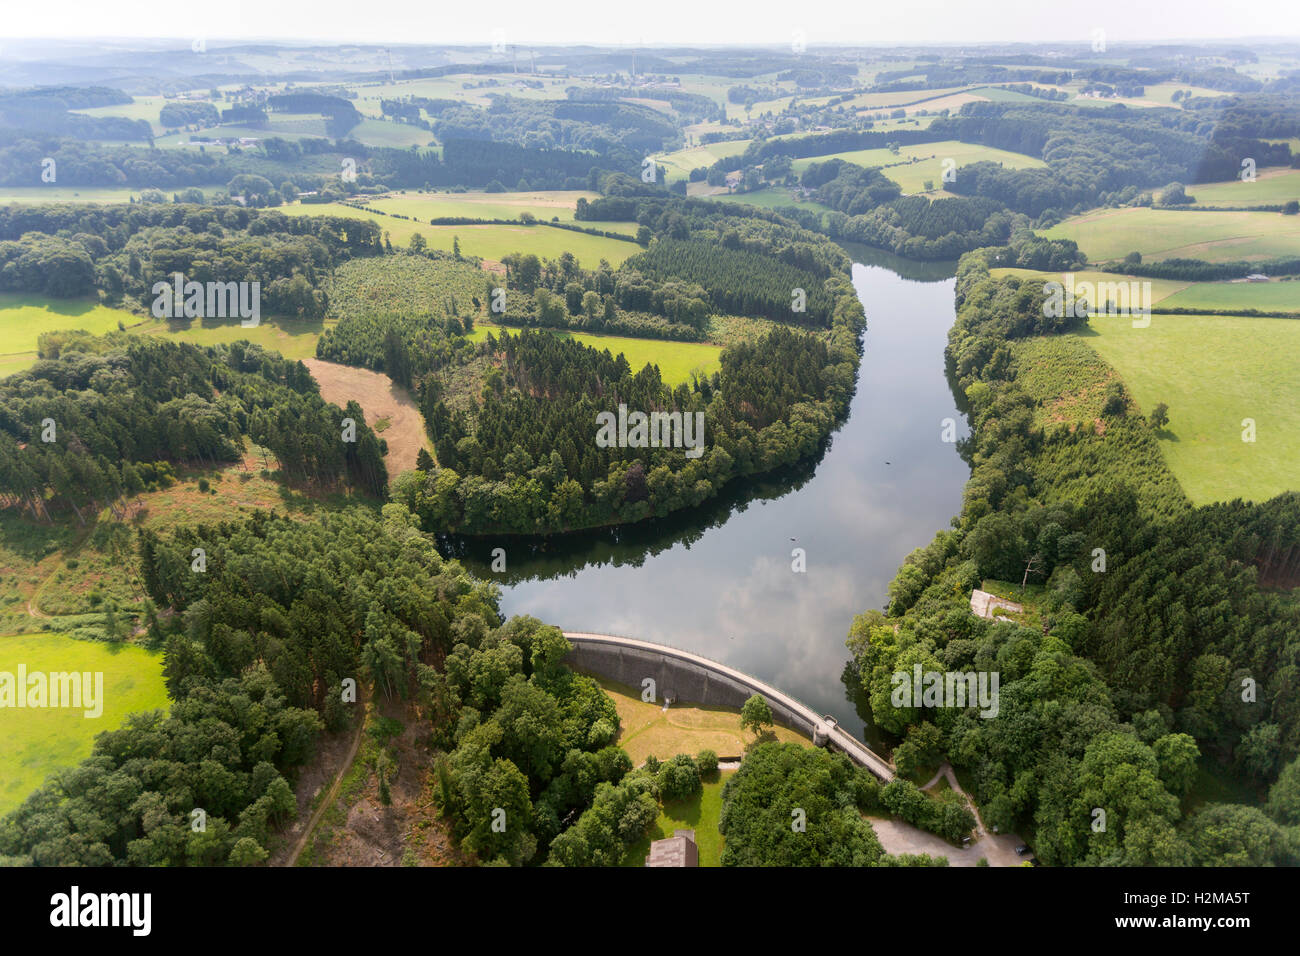 Aerial view, dam at the Ennepe, stausee, dam, island, forest, nature, deciduous forest, aerial view of Ennepetal, Ruhr area, Stock Photo